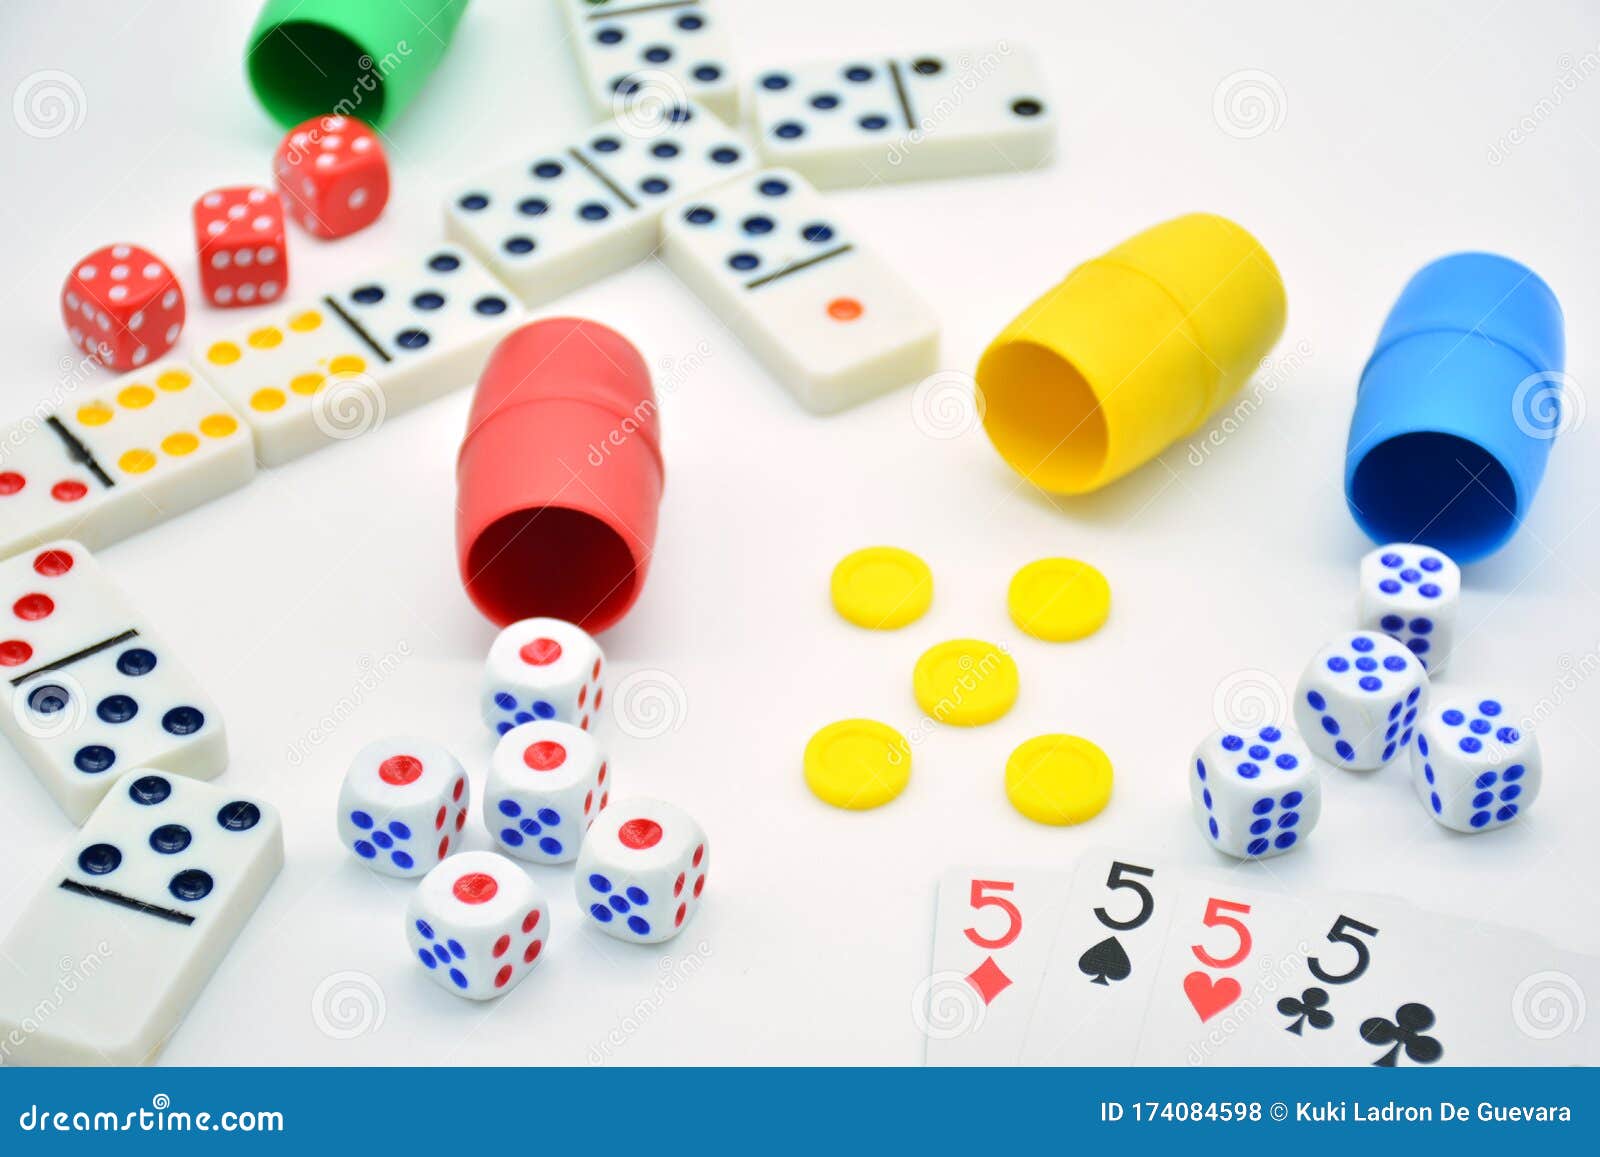 board games, gambling and strategy on white background